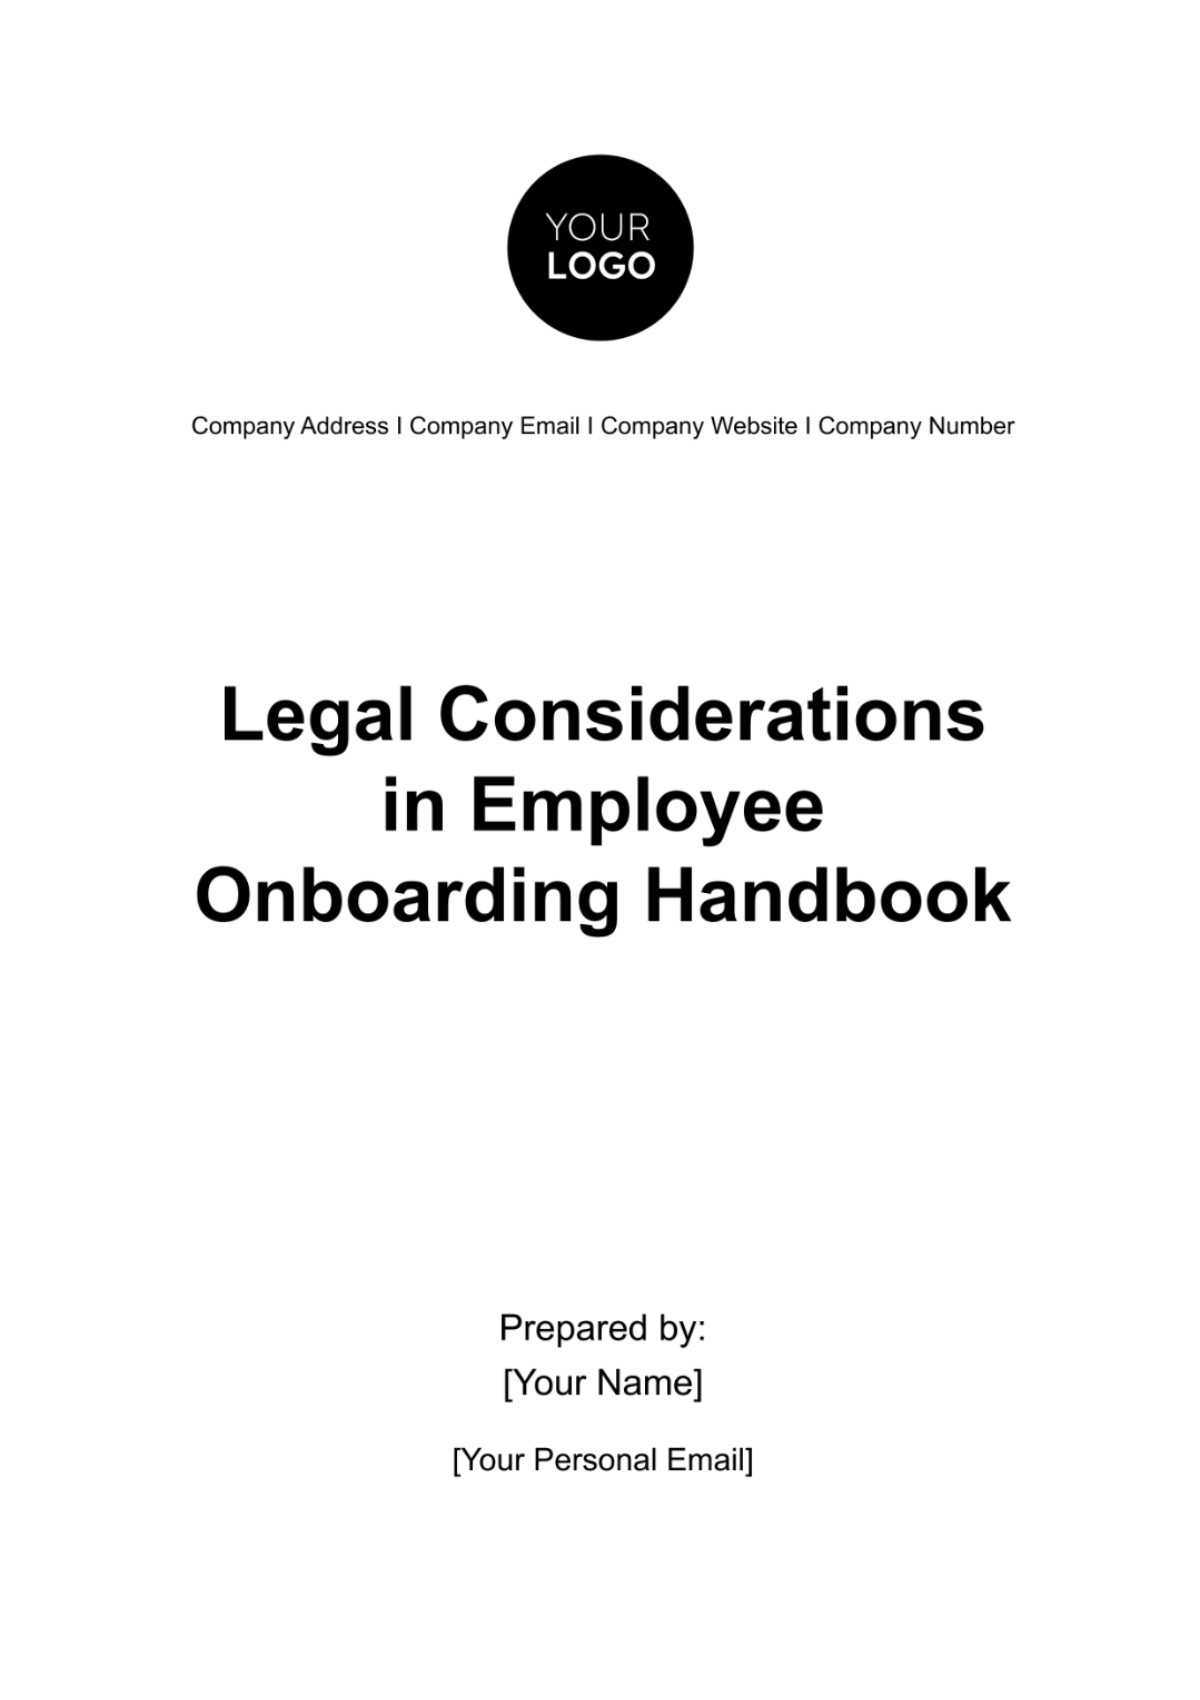 Free Legal Considerations in Employee Onboarding Handbook HR Template